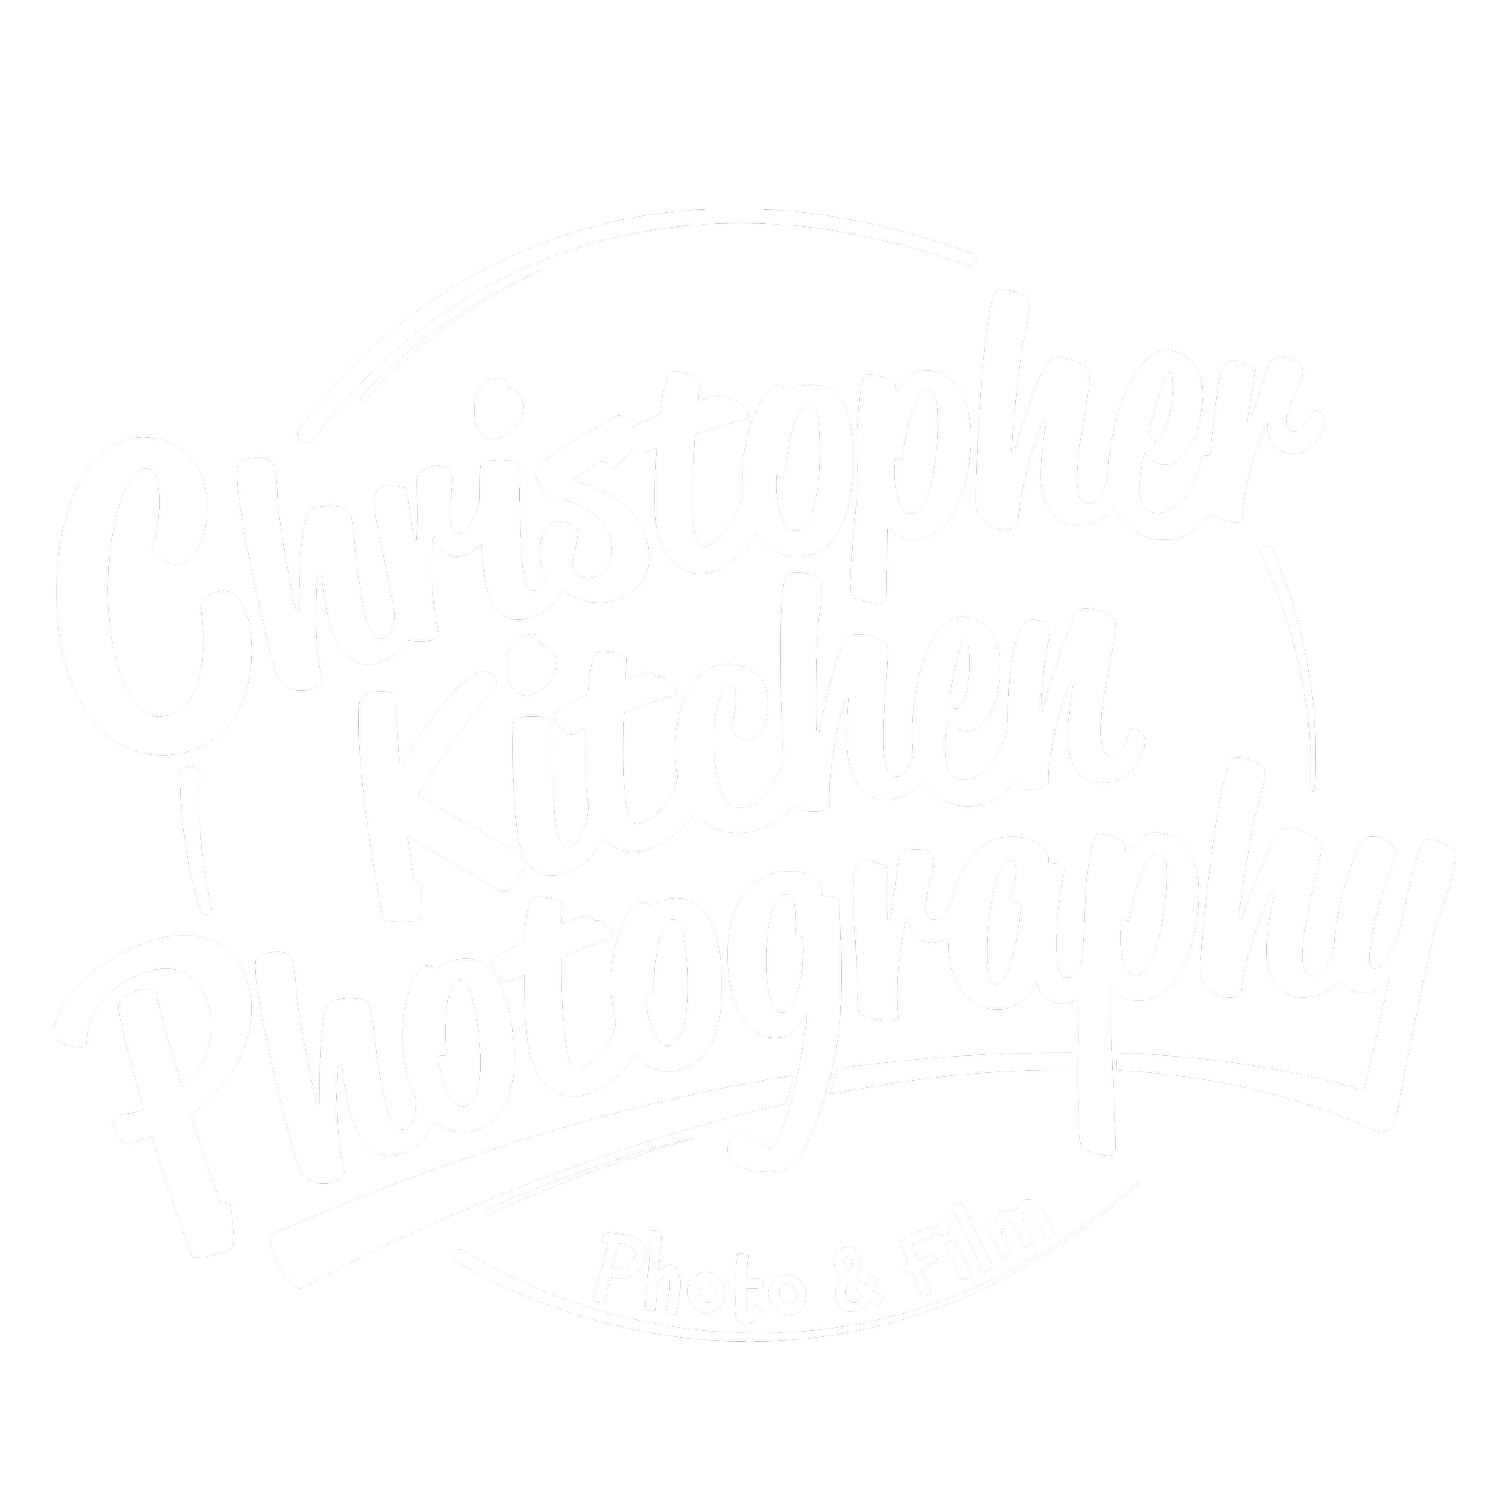 Christopher Kitchen Photography